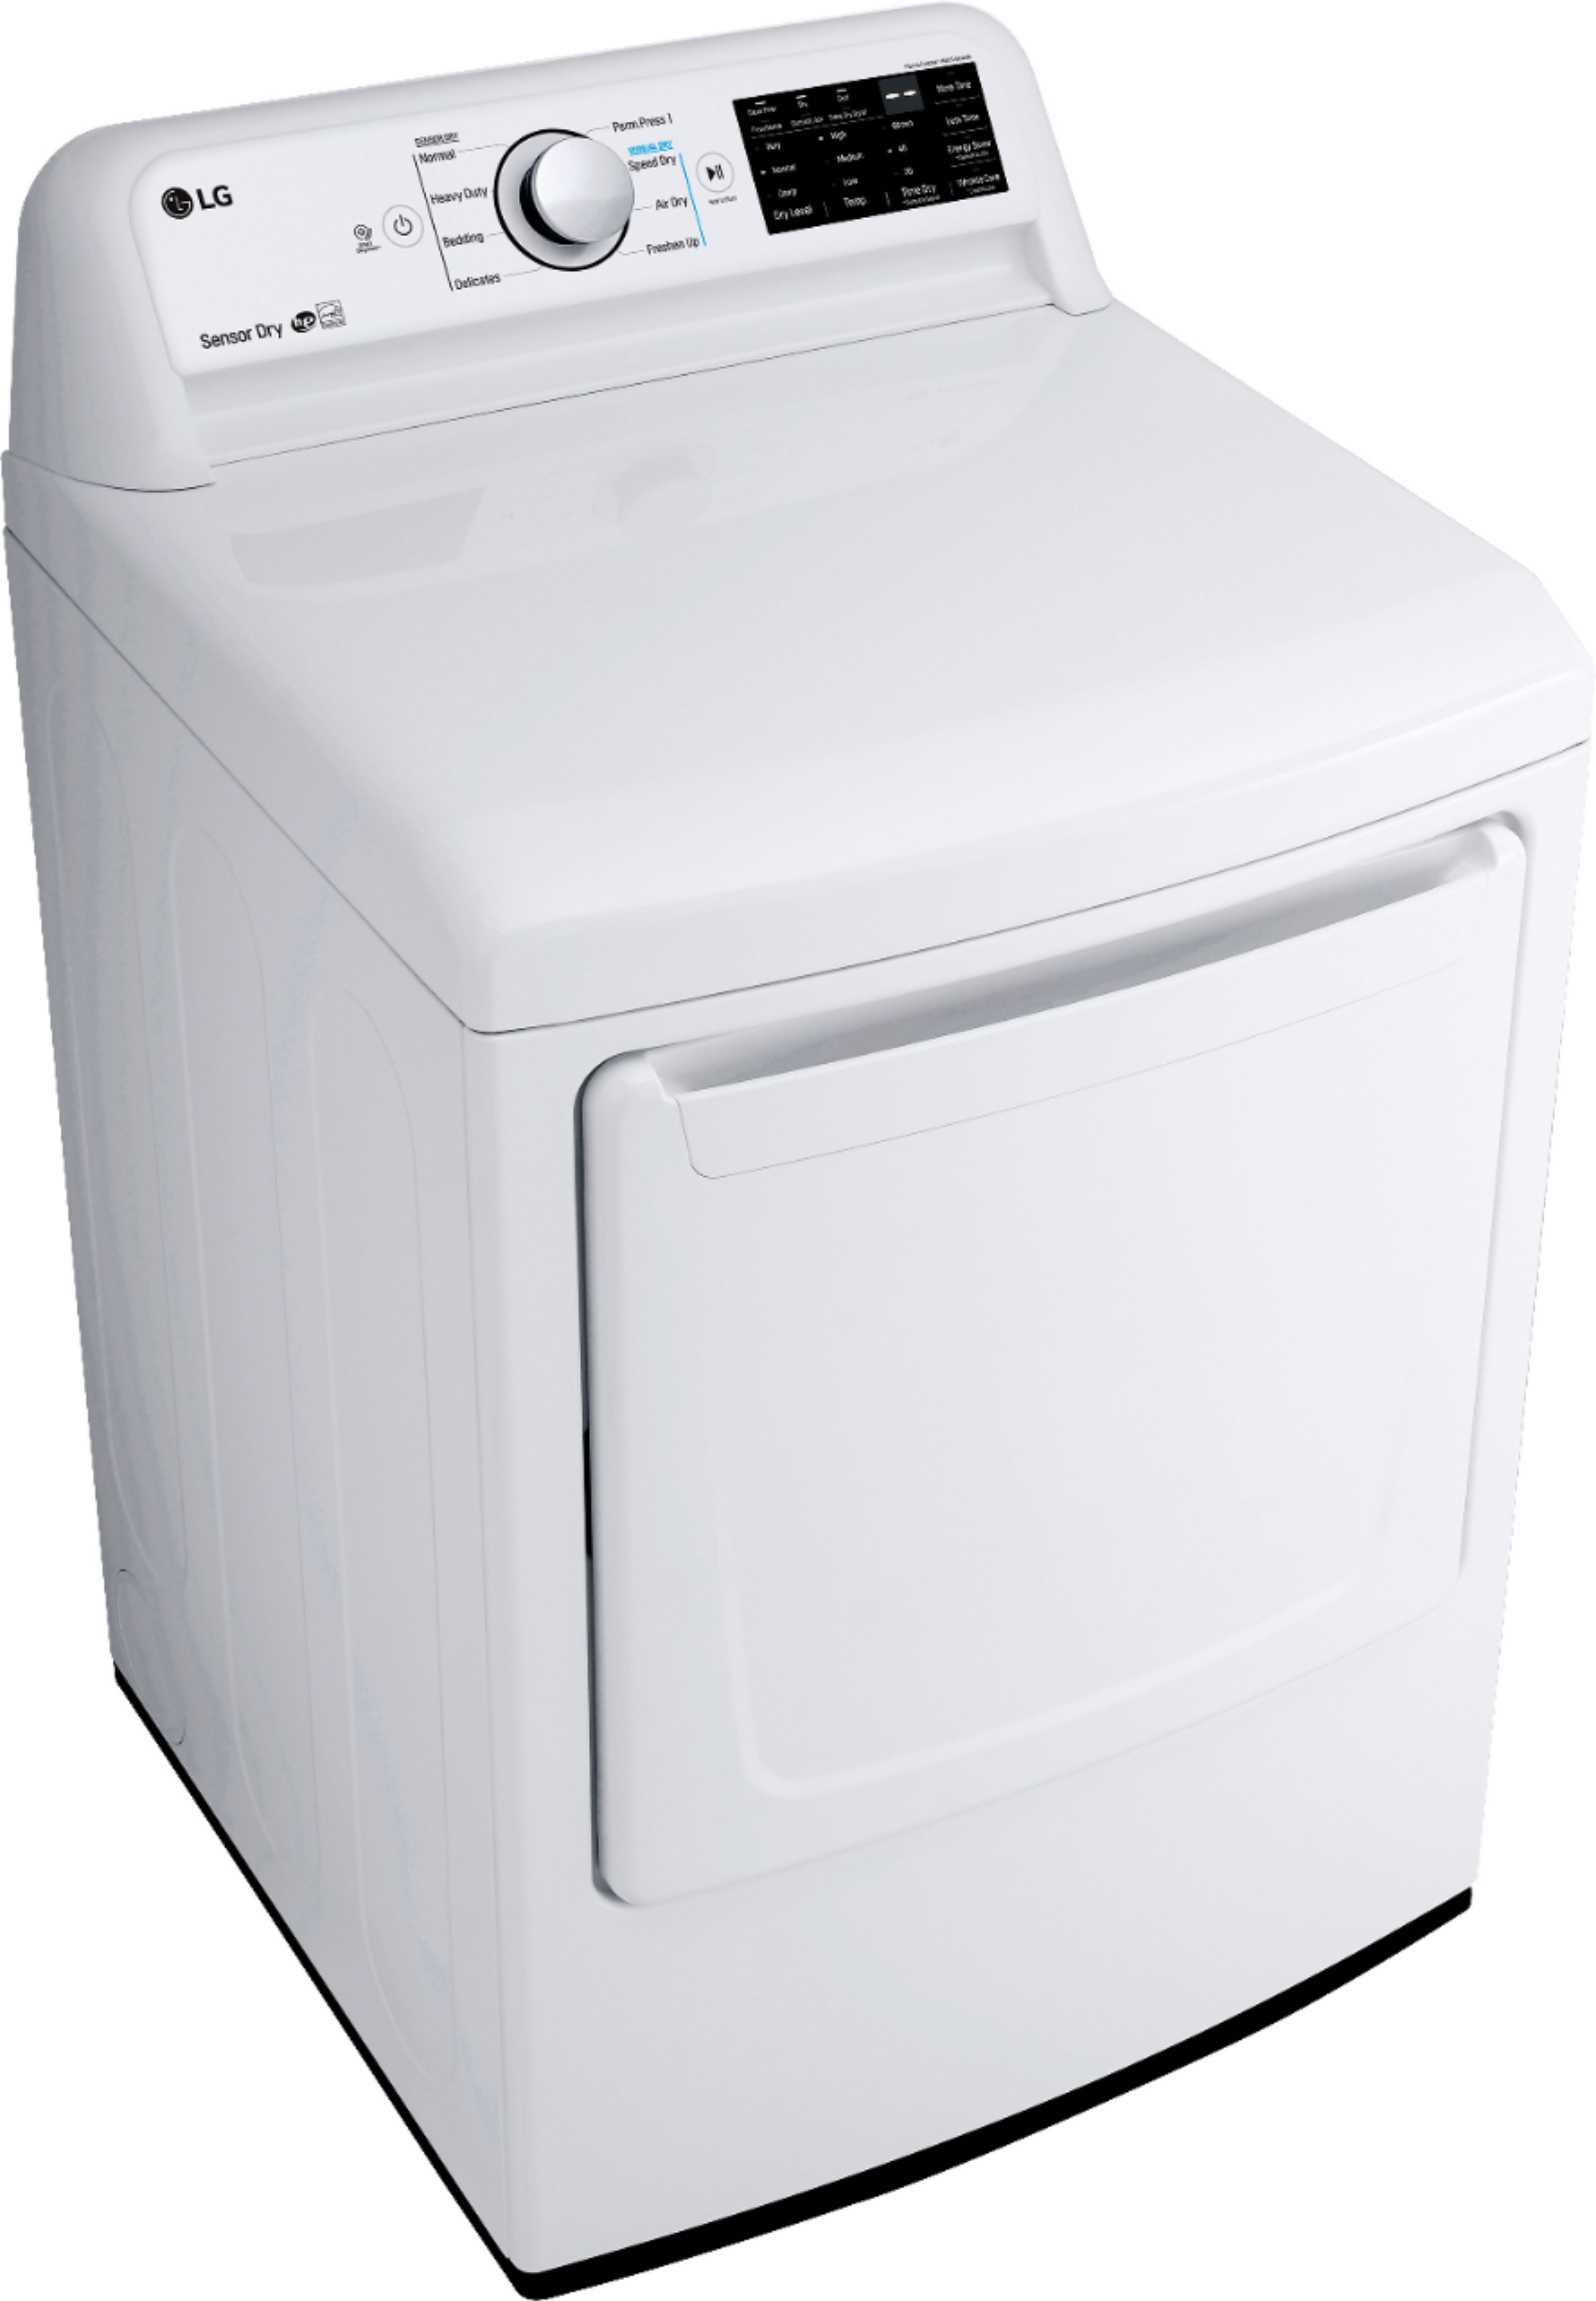 Angle View: LG - 7.3 Cu. Ft. Gas Dryer with Sensor Dry - White